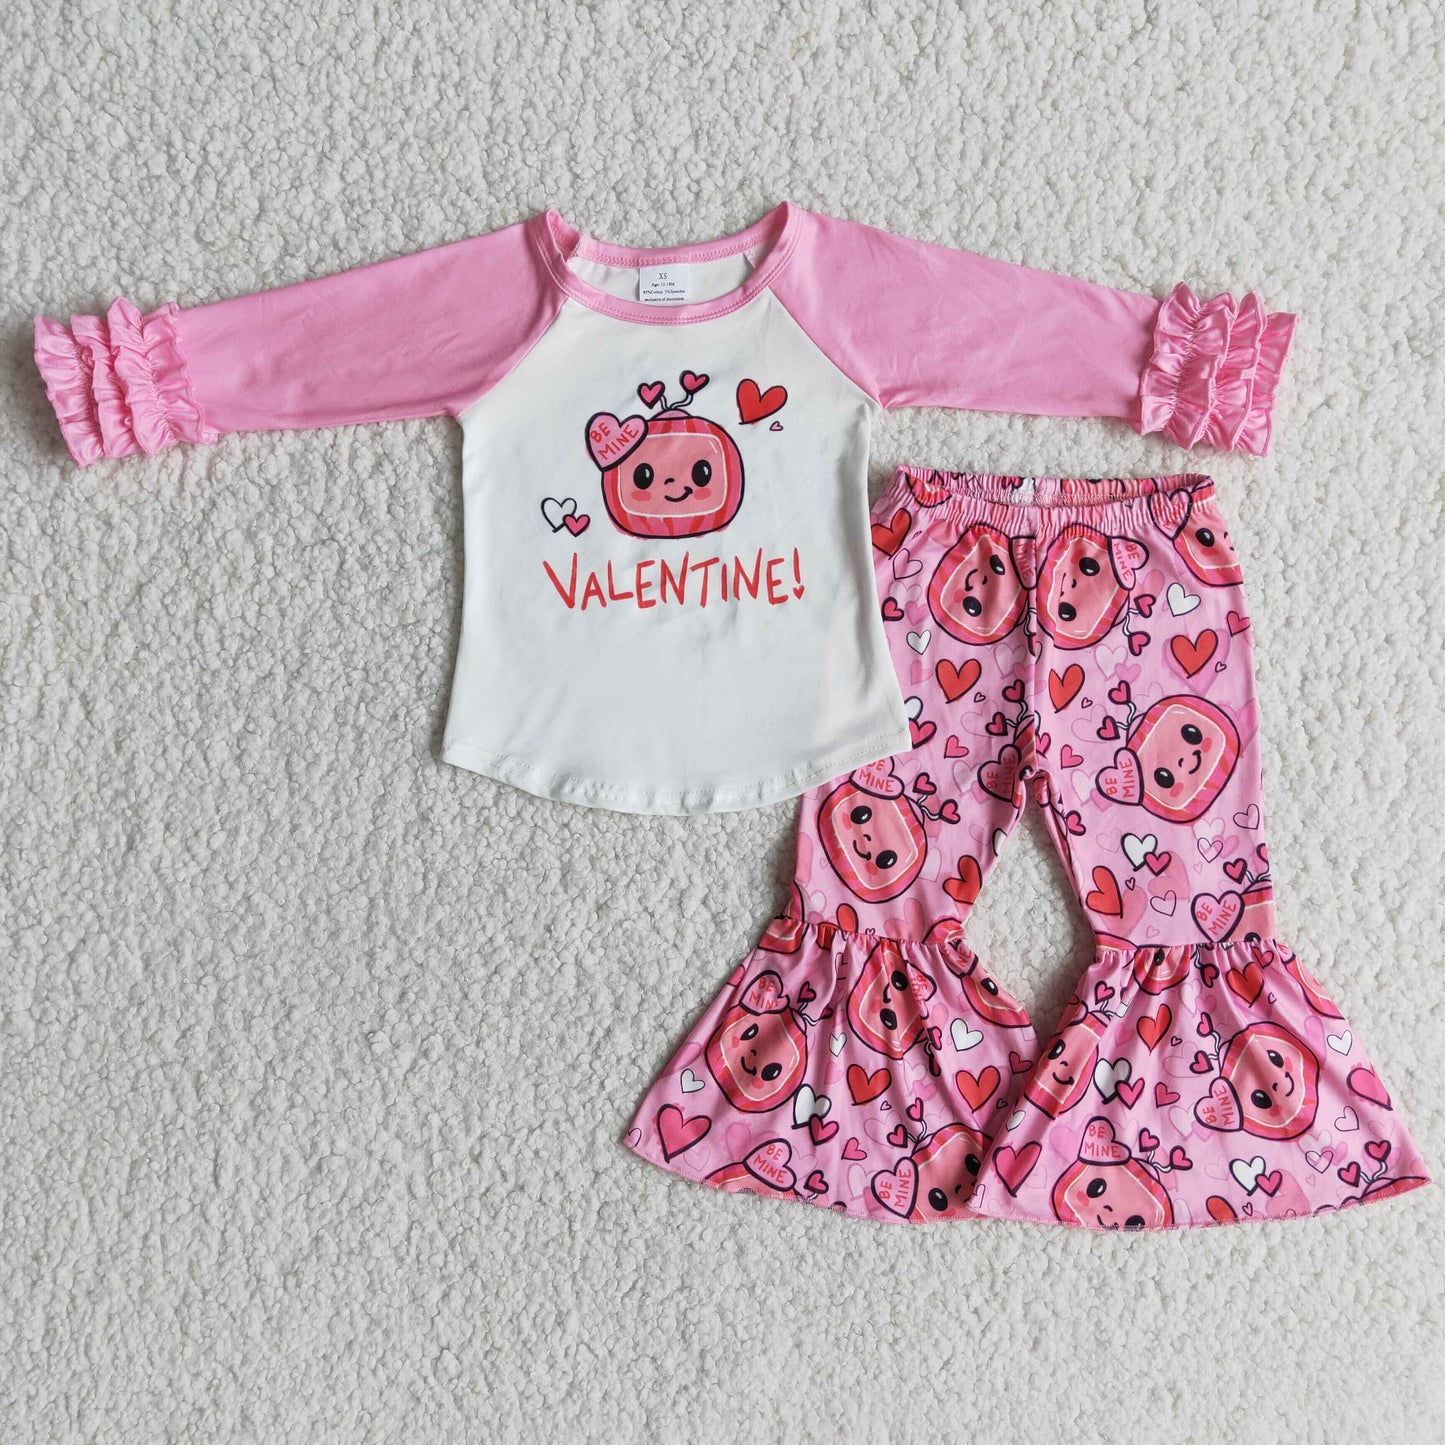 pink sweet heart print outfit